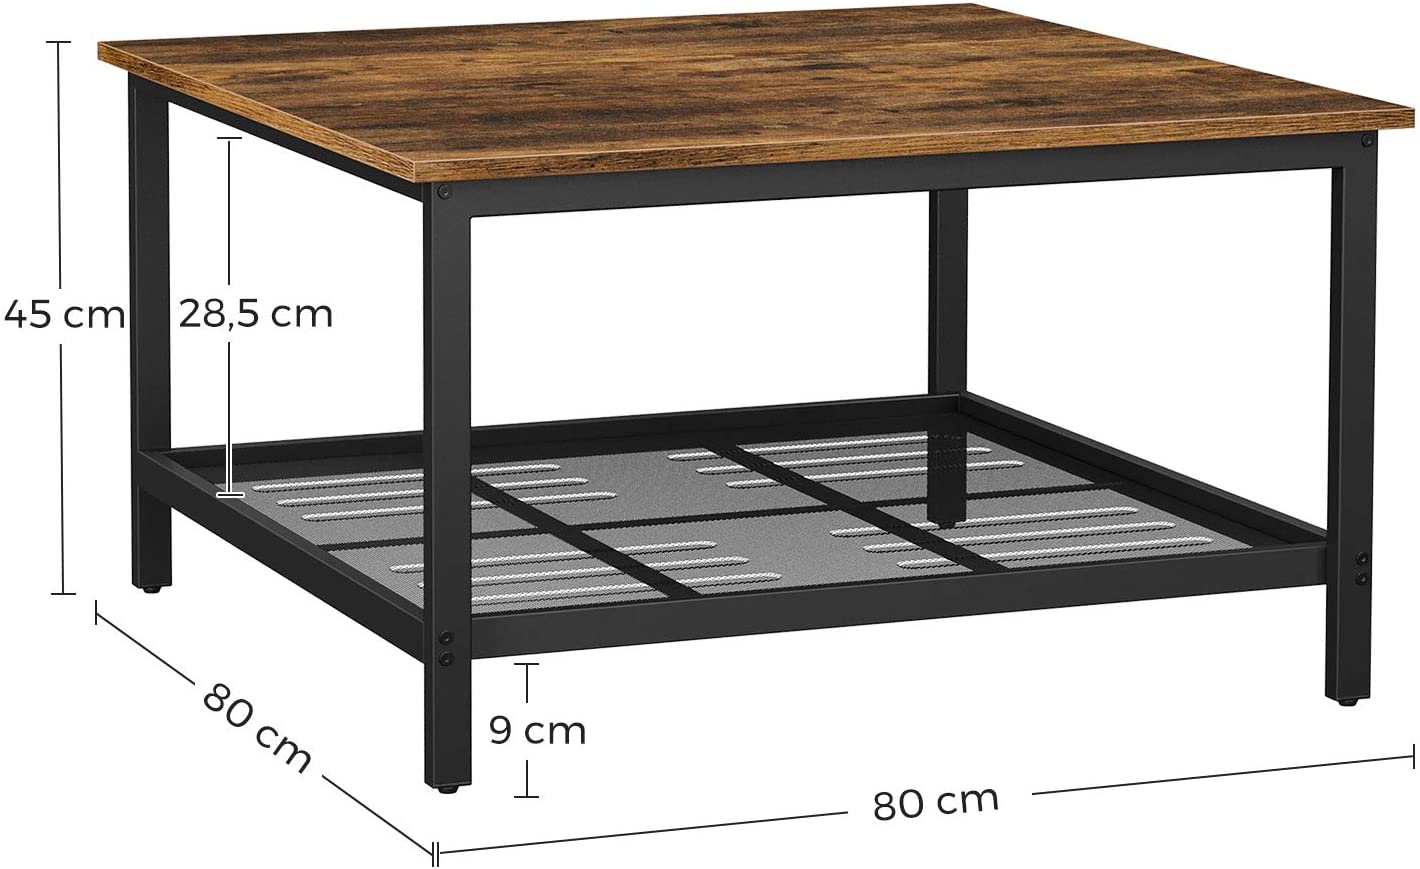 Robust Coffee Table Steel Frame and Mesh Storage Shelf,  Rustic Brown and Black